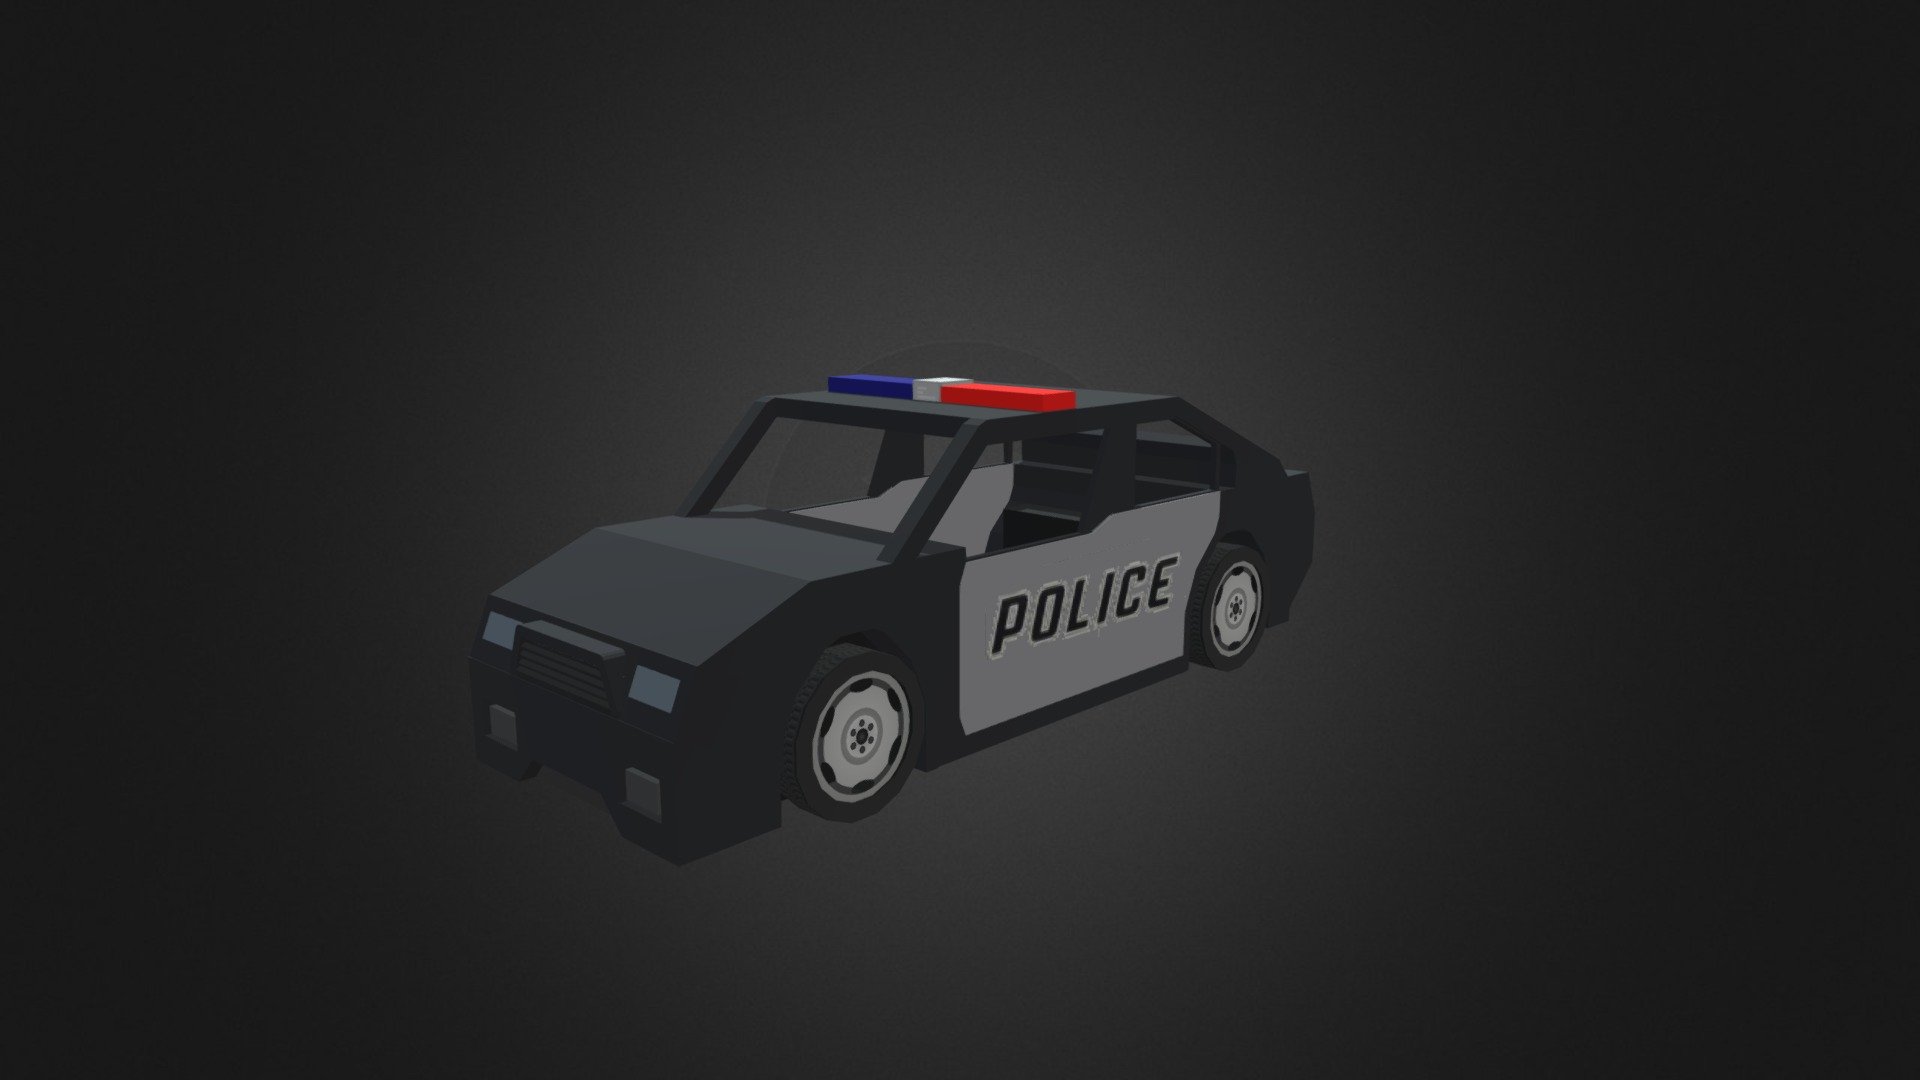 Ei guys, this is my first real vehicle for Minecraft!
As soon as I have other ideas, I will improve the vehicle, criticisms accepted - [VEHICLES] Police Car - Minecraft Model - 3D model by Thomas (ttodgers) (@ttodgers) 3d model